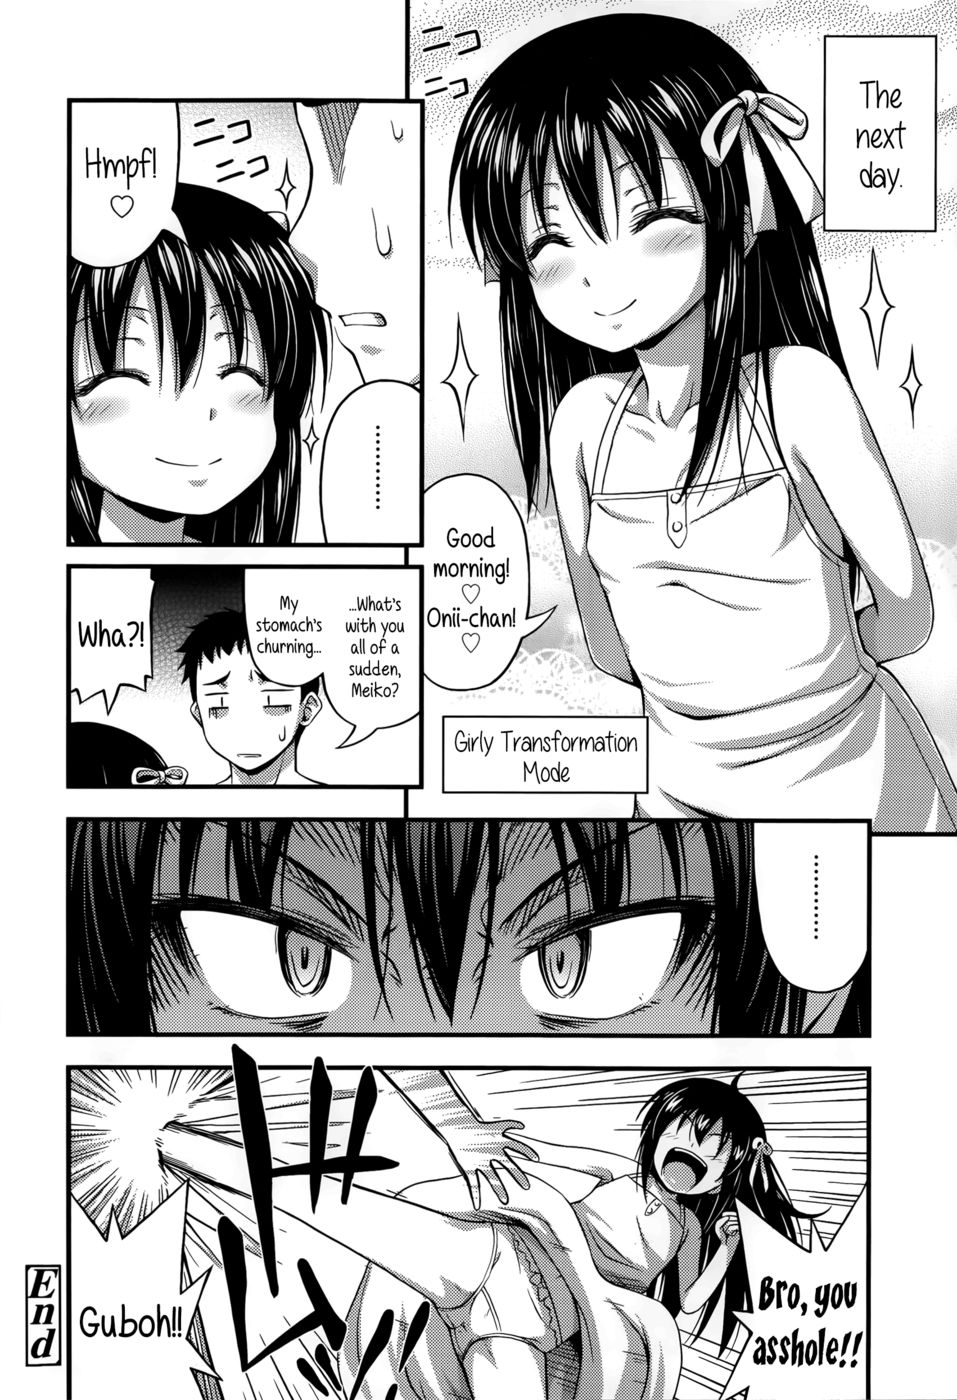 Sisters Forcexxxx - Our Home is my Sister's Ring-Read-Hentai Manga Hentai Comic - Page: 18 -  Online porn video at mobile